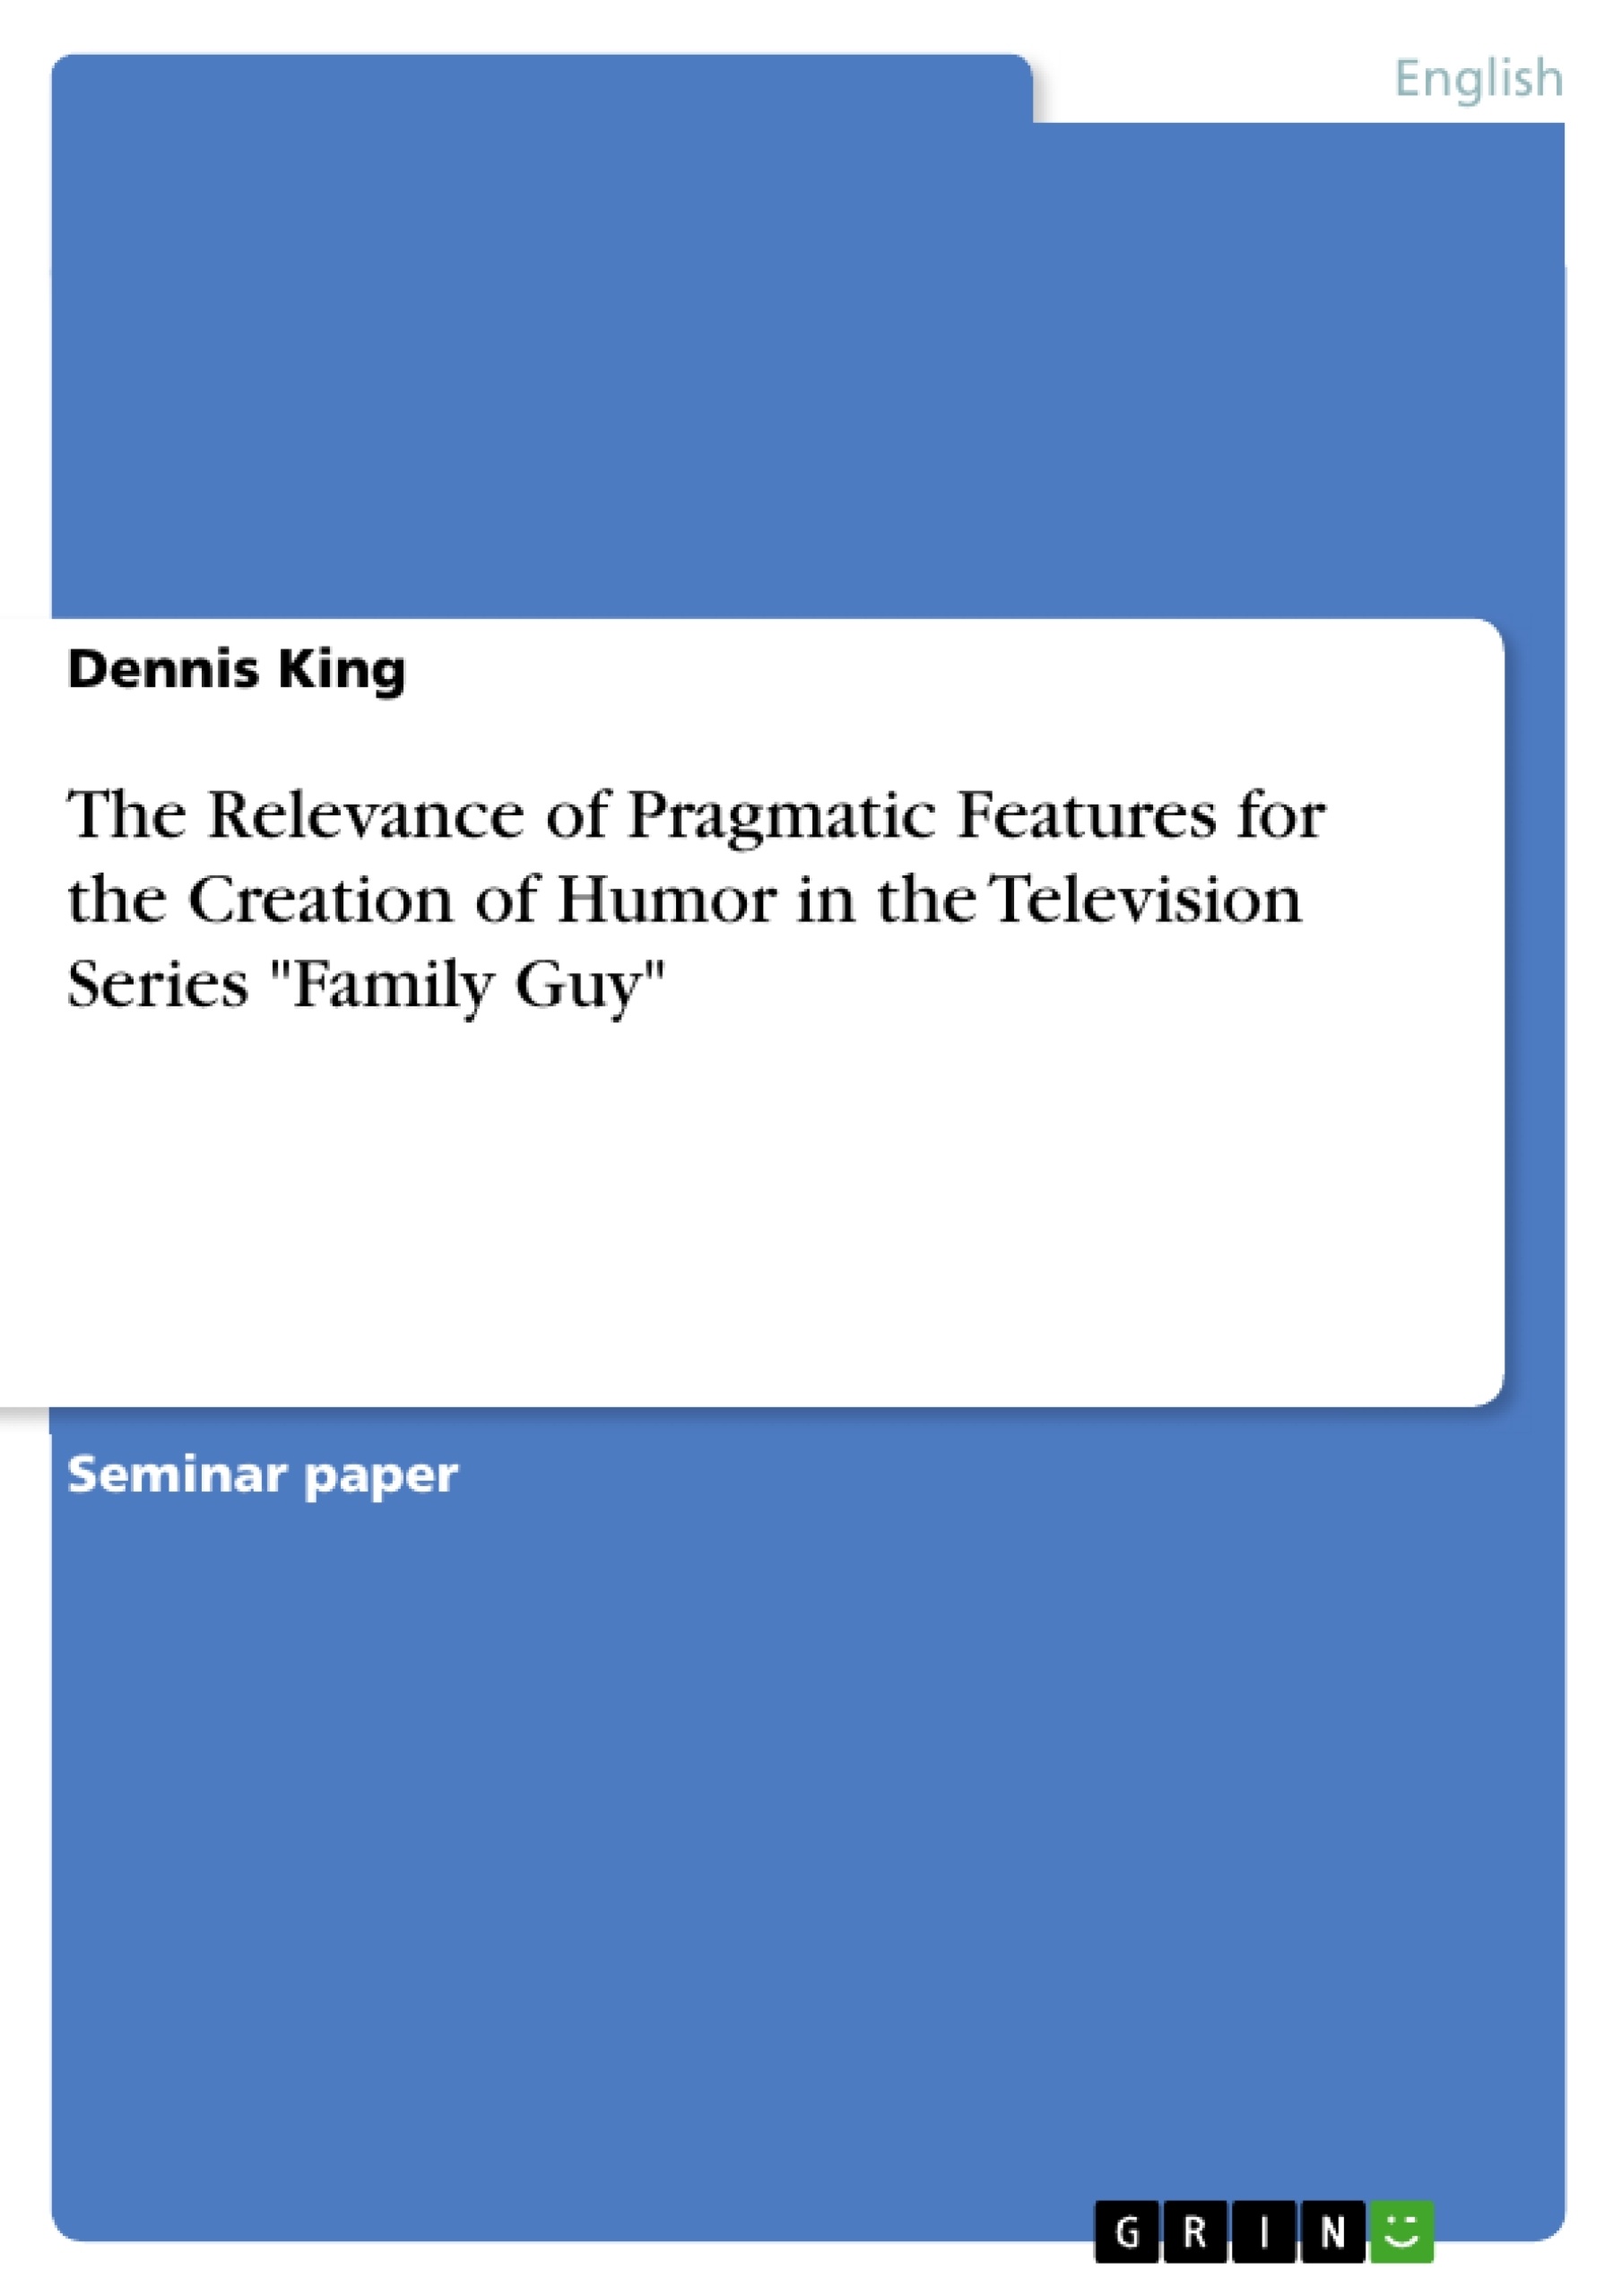 Titel: The Relevance of Pragmatic Features for the Creation of Humor in the Television Series "Family Guy"